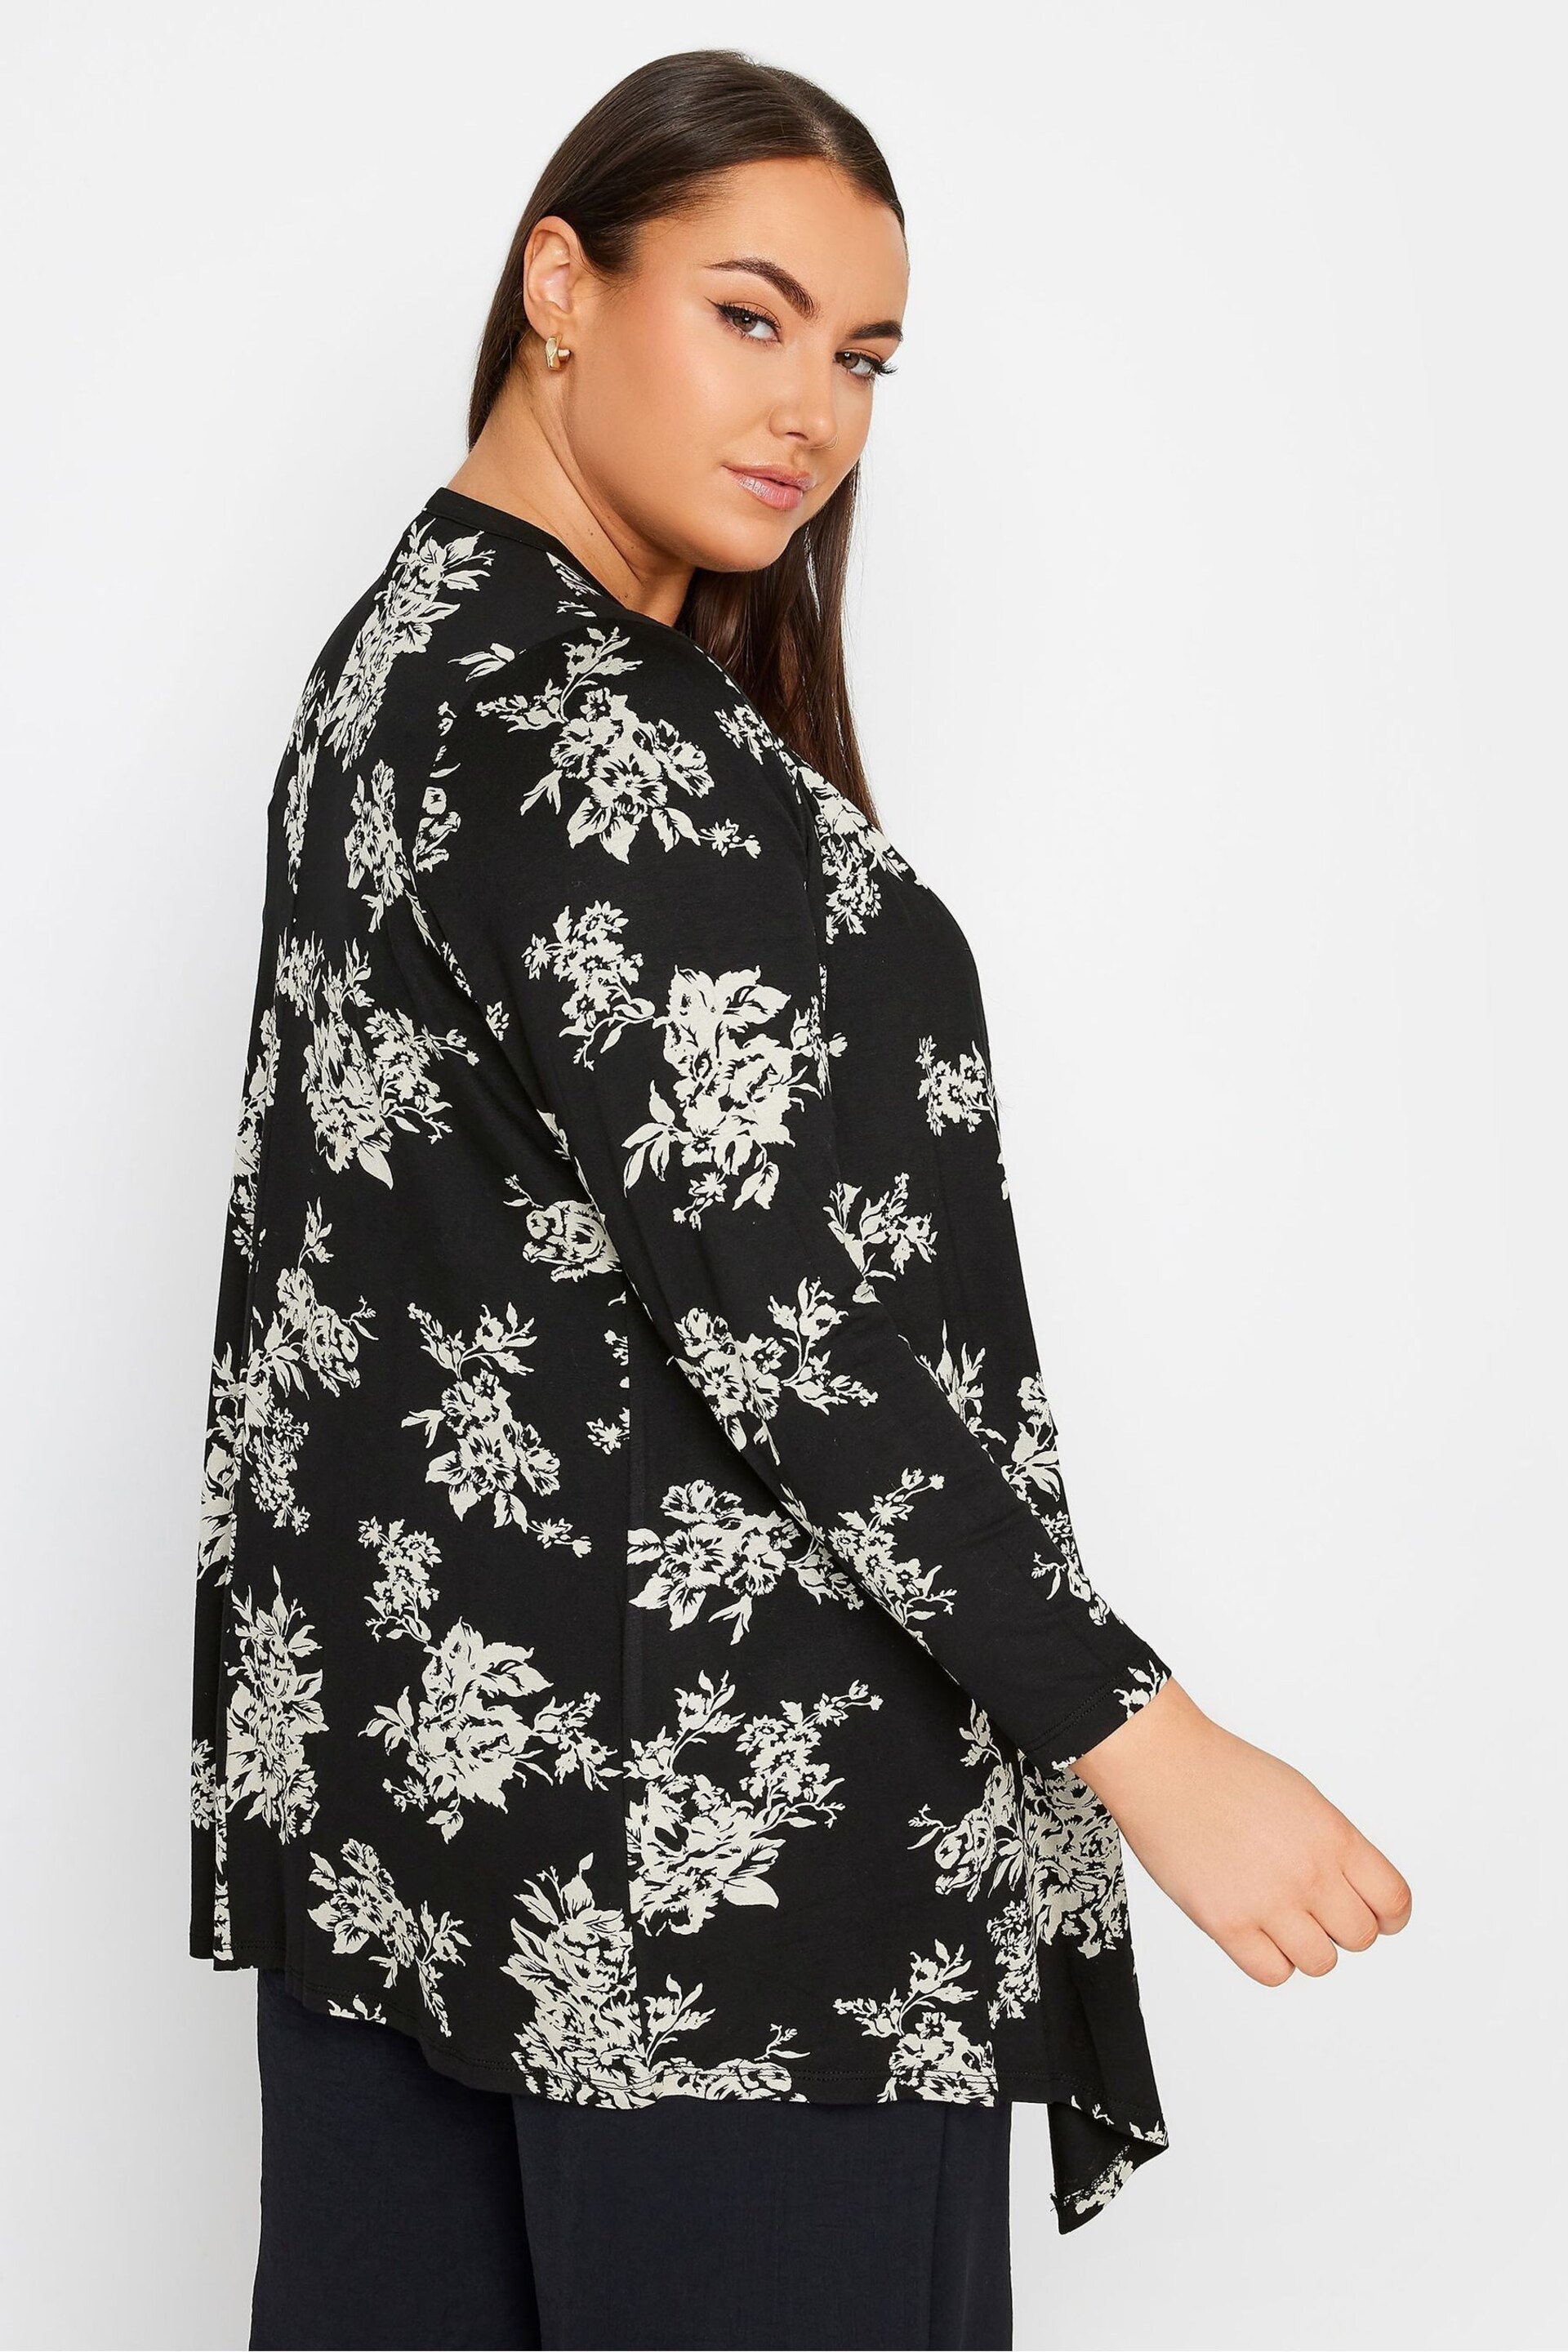 Yours Curve Black Jersey Cardigan - Image 2 of 4